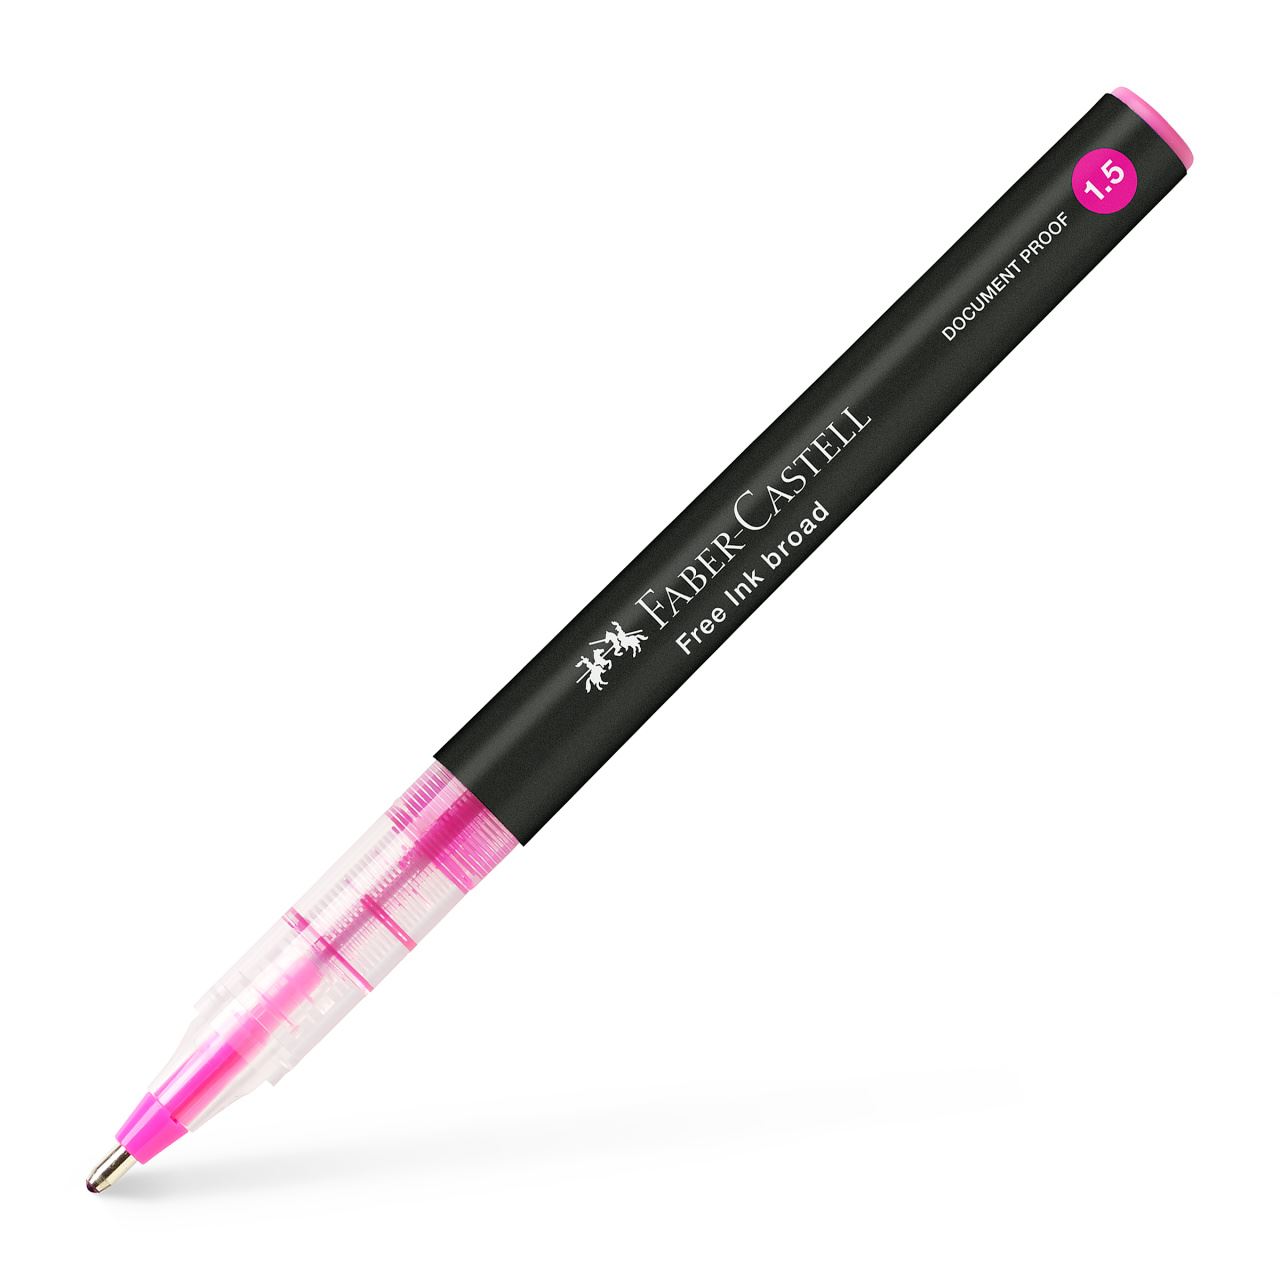 Faber-Castell - Free Ink rollerball, 1.5 mm, pink